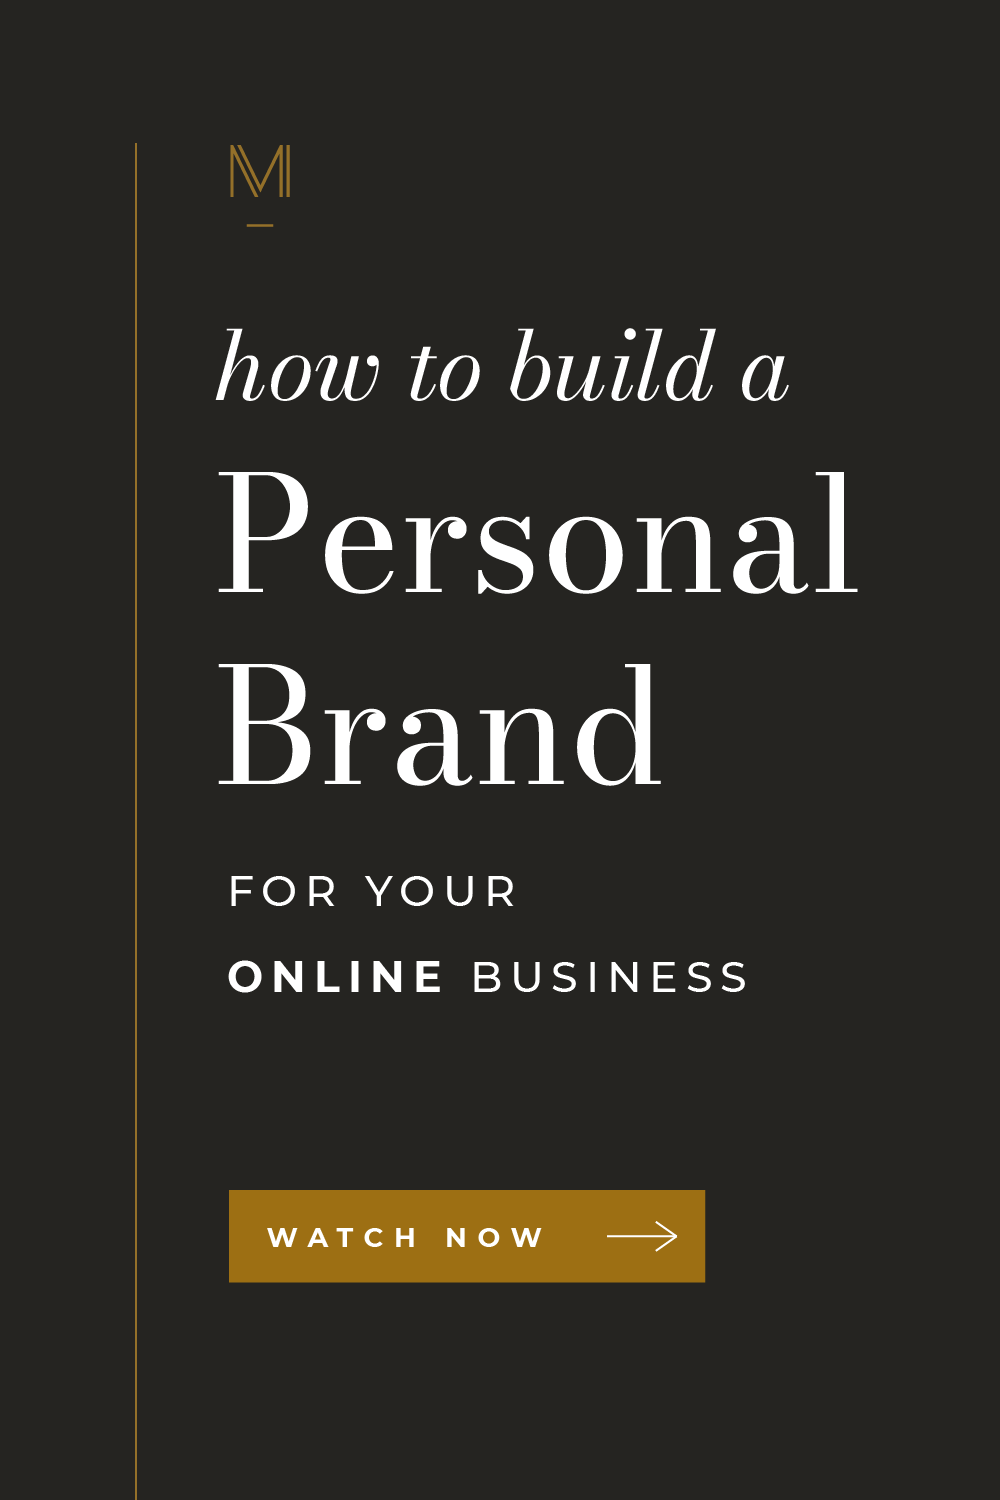 Want to know how to build a personal brand for your online business? This blog post is for you! You’ll learn my best personal brand tips, including how to position yourself as a luxury brand leader and exceptional personal brand examples. #luxurybrand #personalbrand #lifecoach #brandingtips